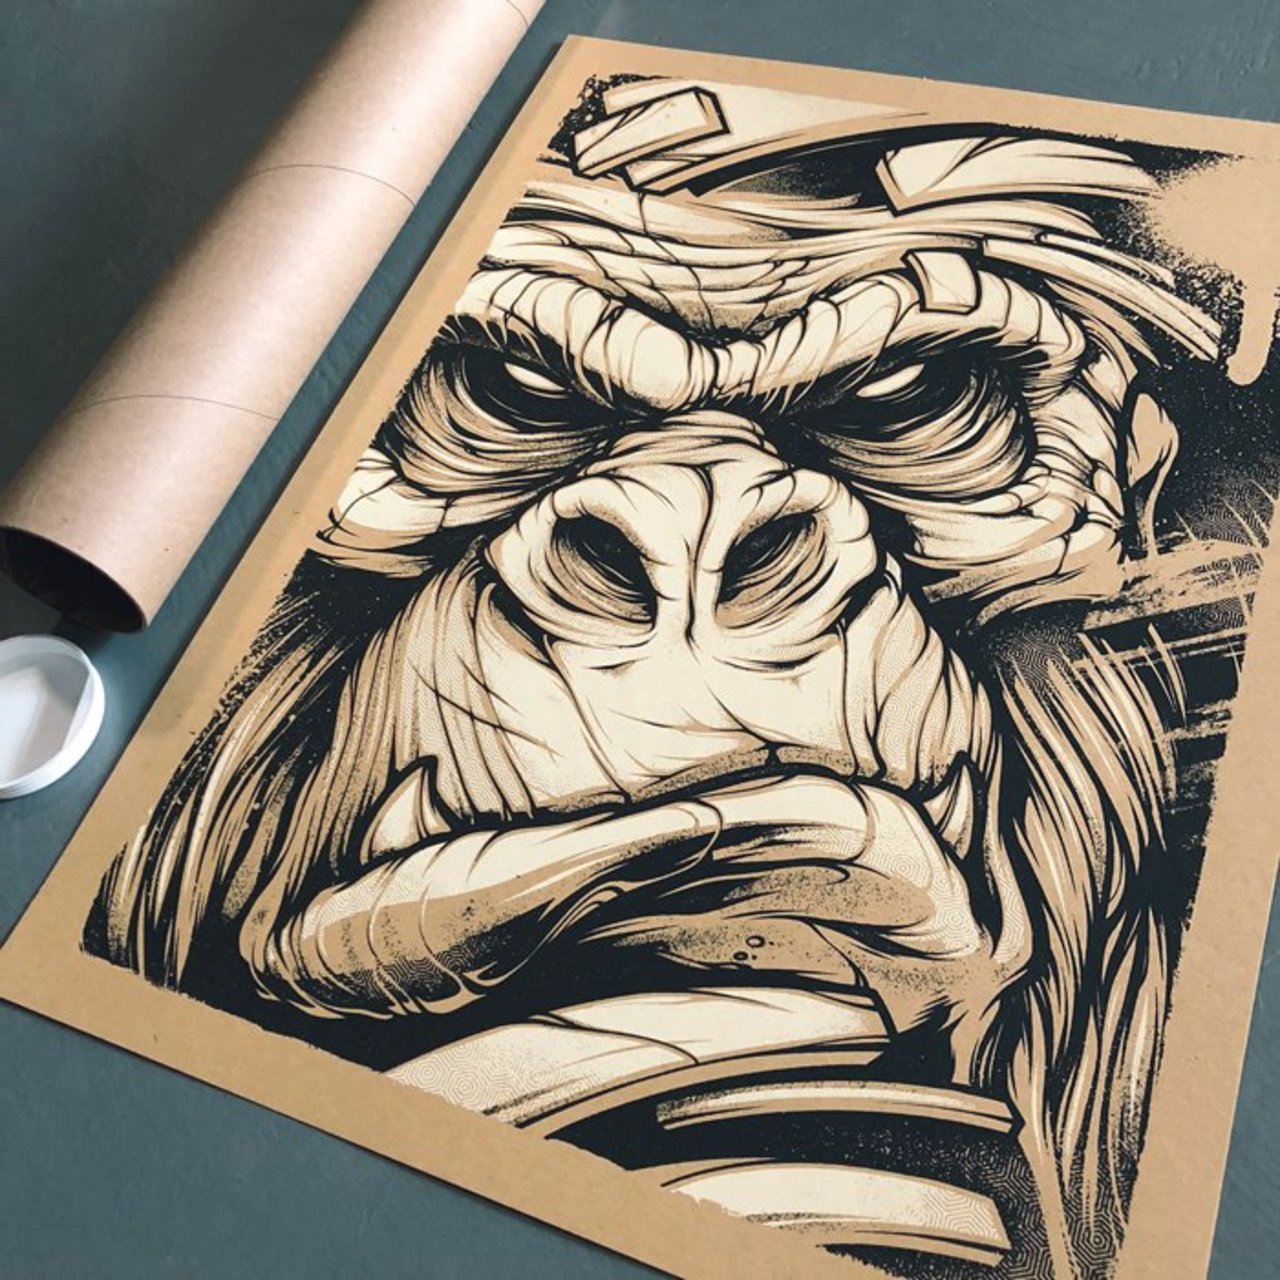 NEW LIMITED EDITION 2-Color, 18”x24” Screen Print Poster Strictly limited to 50. Signed and numbered. https://www.absorb81.com/store/gorilla-screenprint #Gorilla #Screeprint #Flatstock #Art #Artwork #FrenchPaper #Print #Artprint #Animal #Beast #Graffiti #Ink #Design #KraftPaper https://t.co/o17Tat2MH5